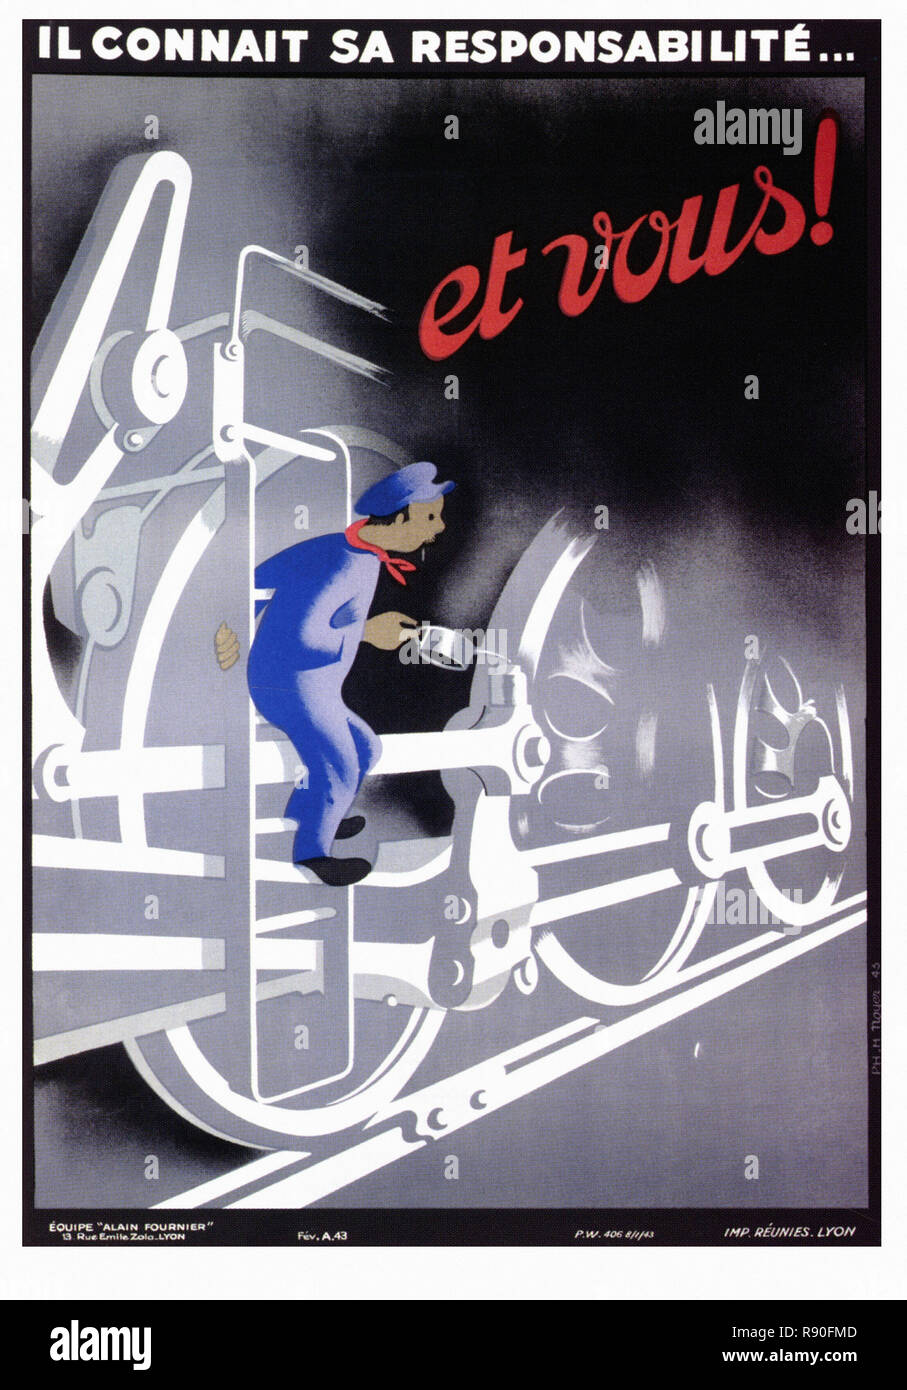 He Knows His Responsibility - Vintage French Collaboration Propaganda Poster Stock Photo